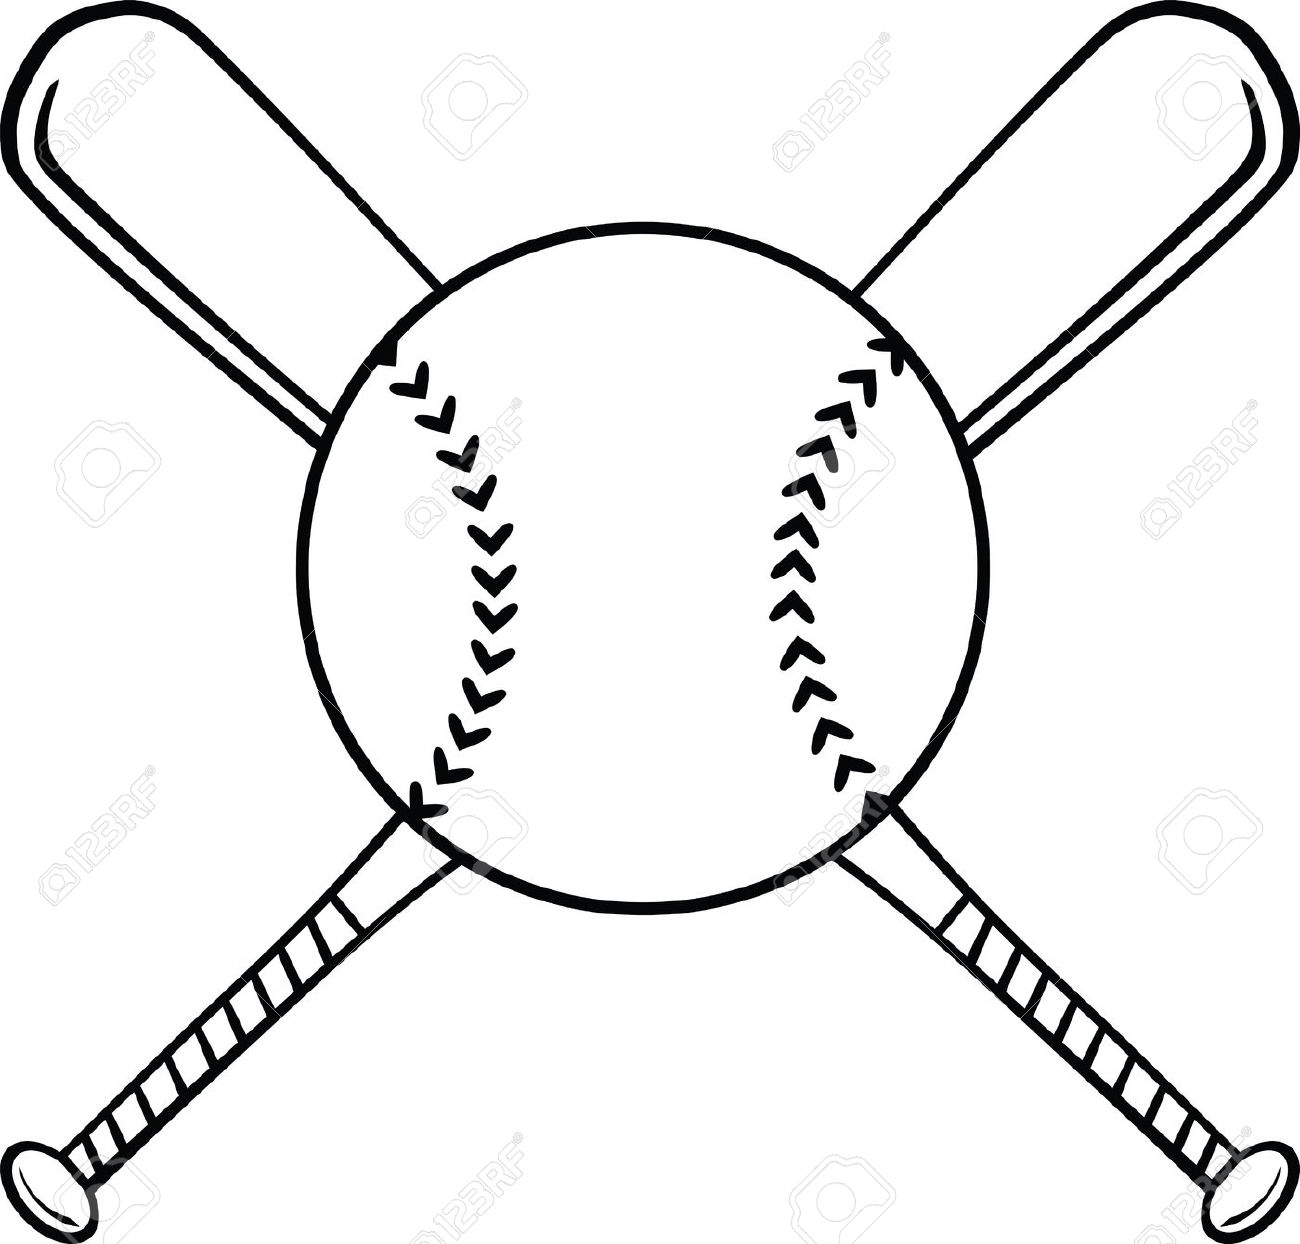 baseball clipart black and wh